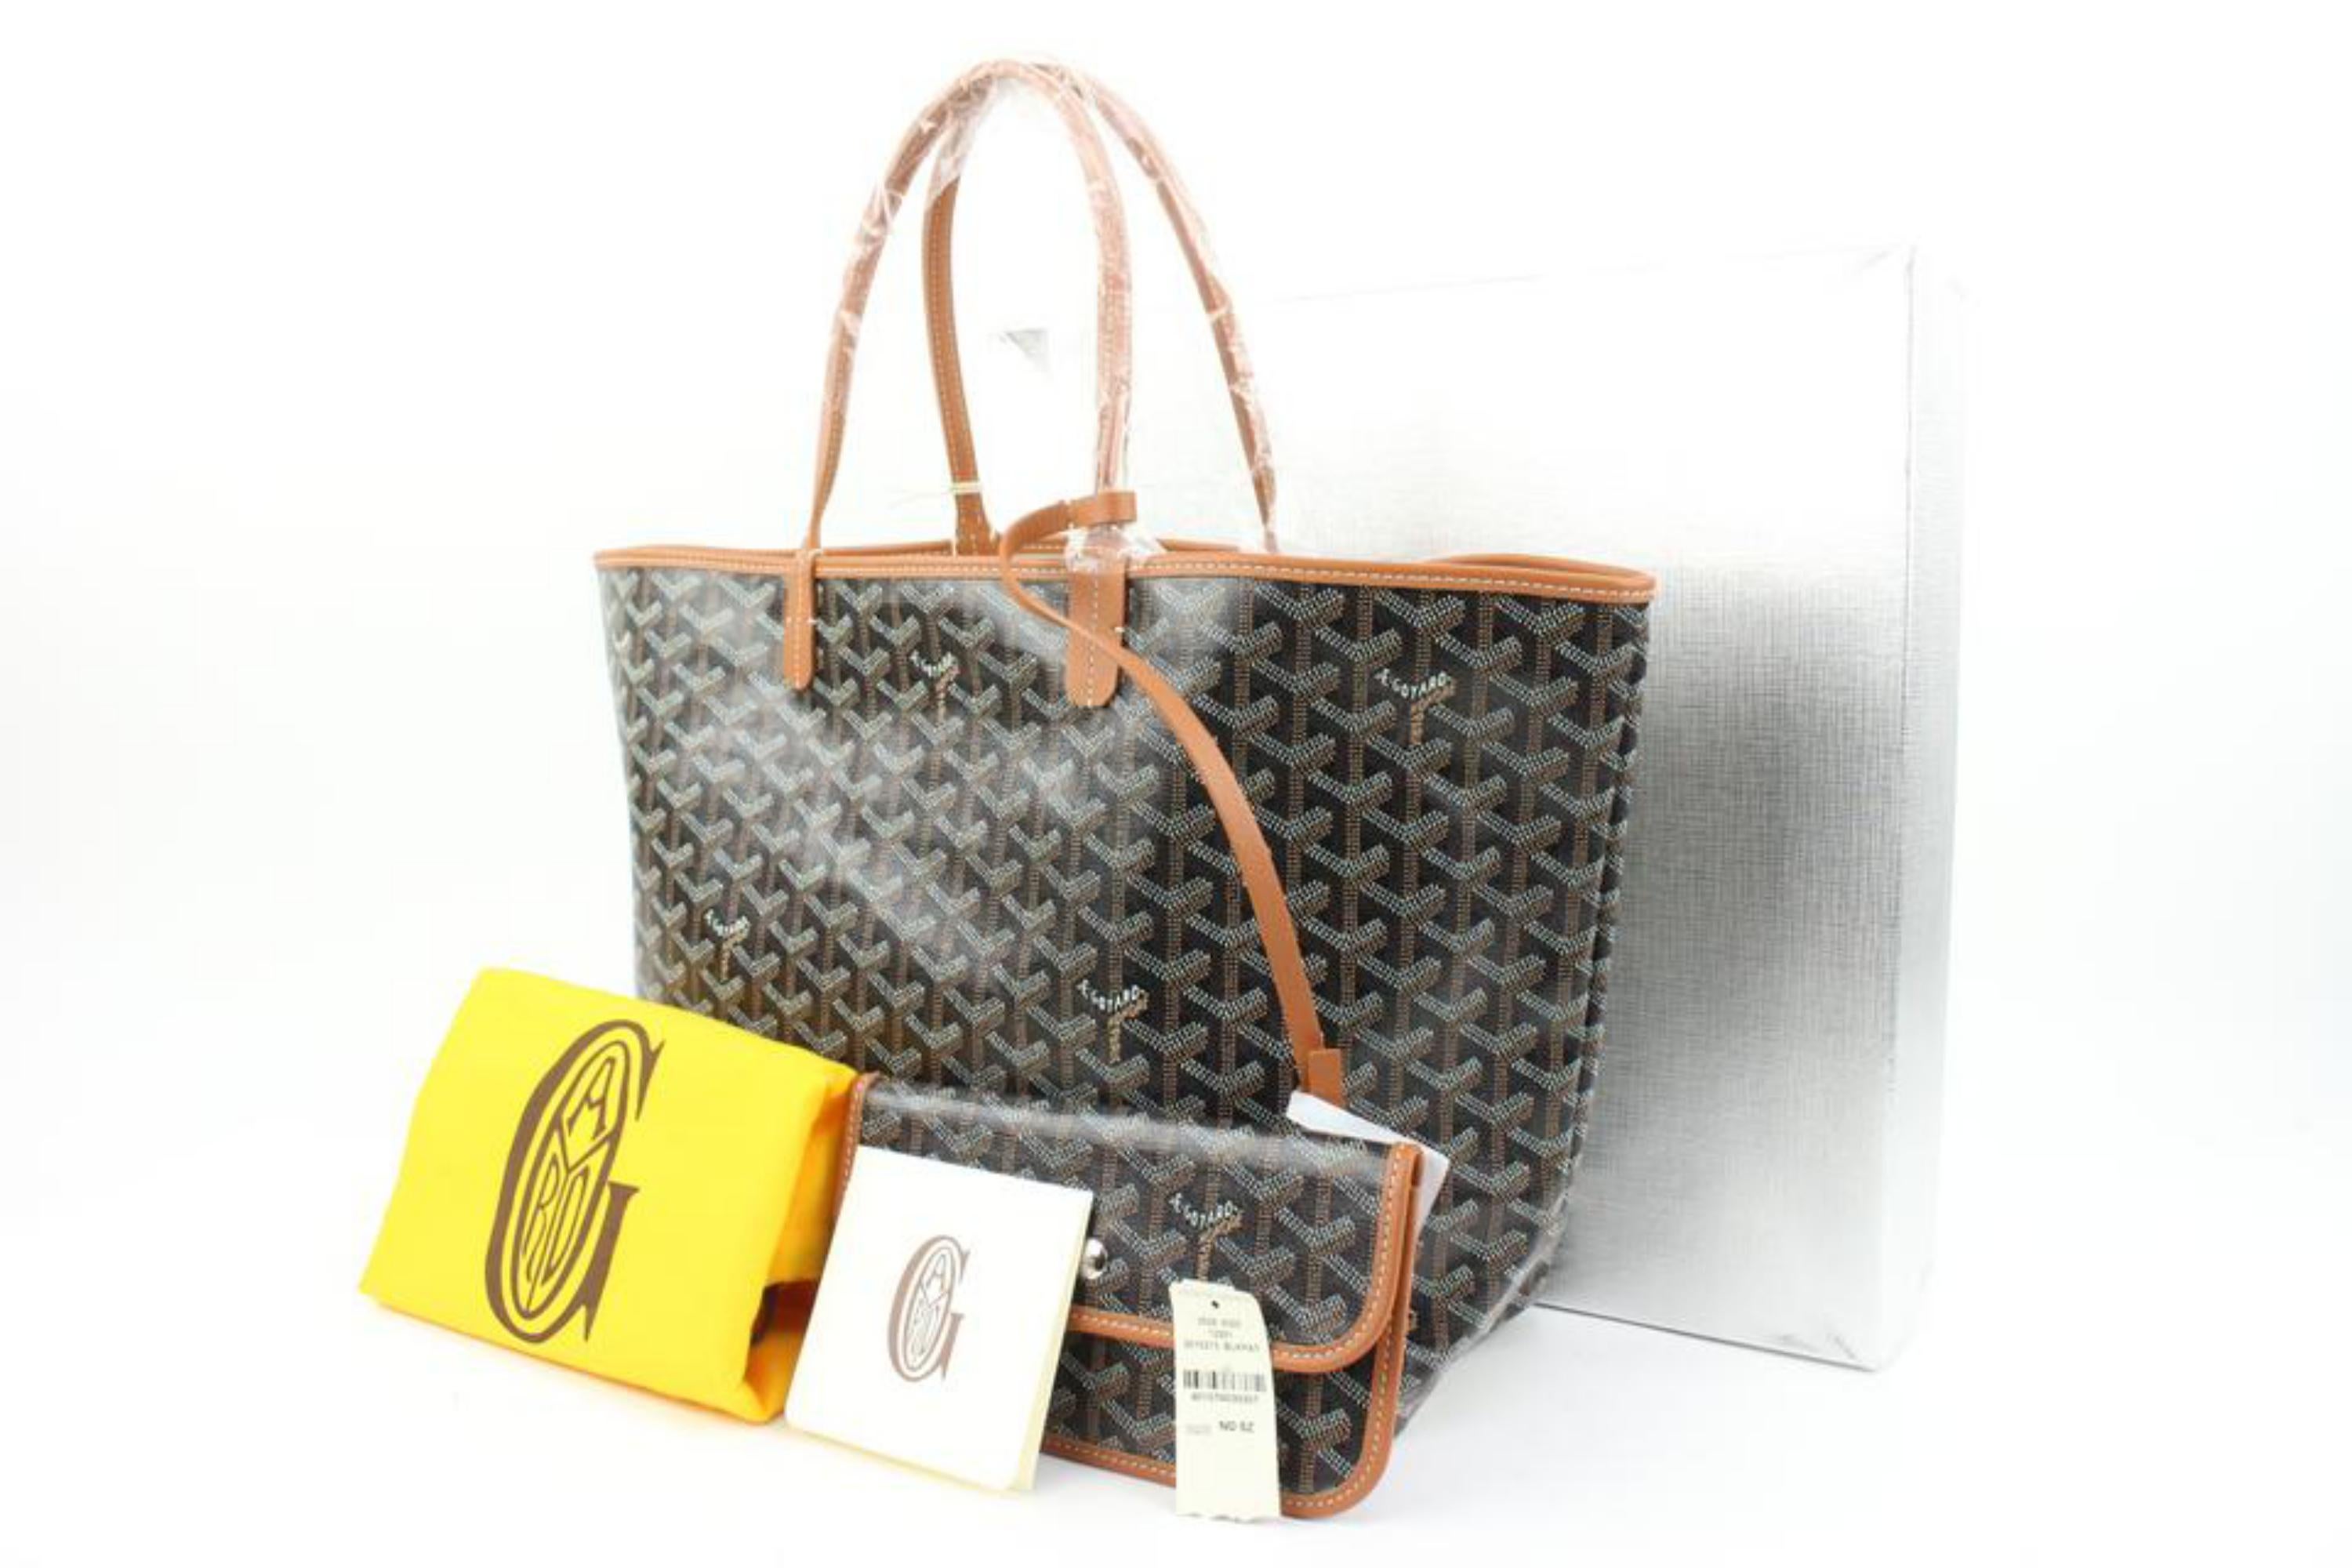 Goyard Black x Brown Chevron St Louis PM Tote Bag with Pouch 51gy23s
Date Code/Serial Number: ADM 120202
Made In: France
Measurements: Length:  18.5